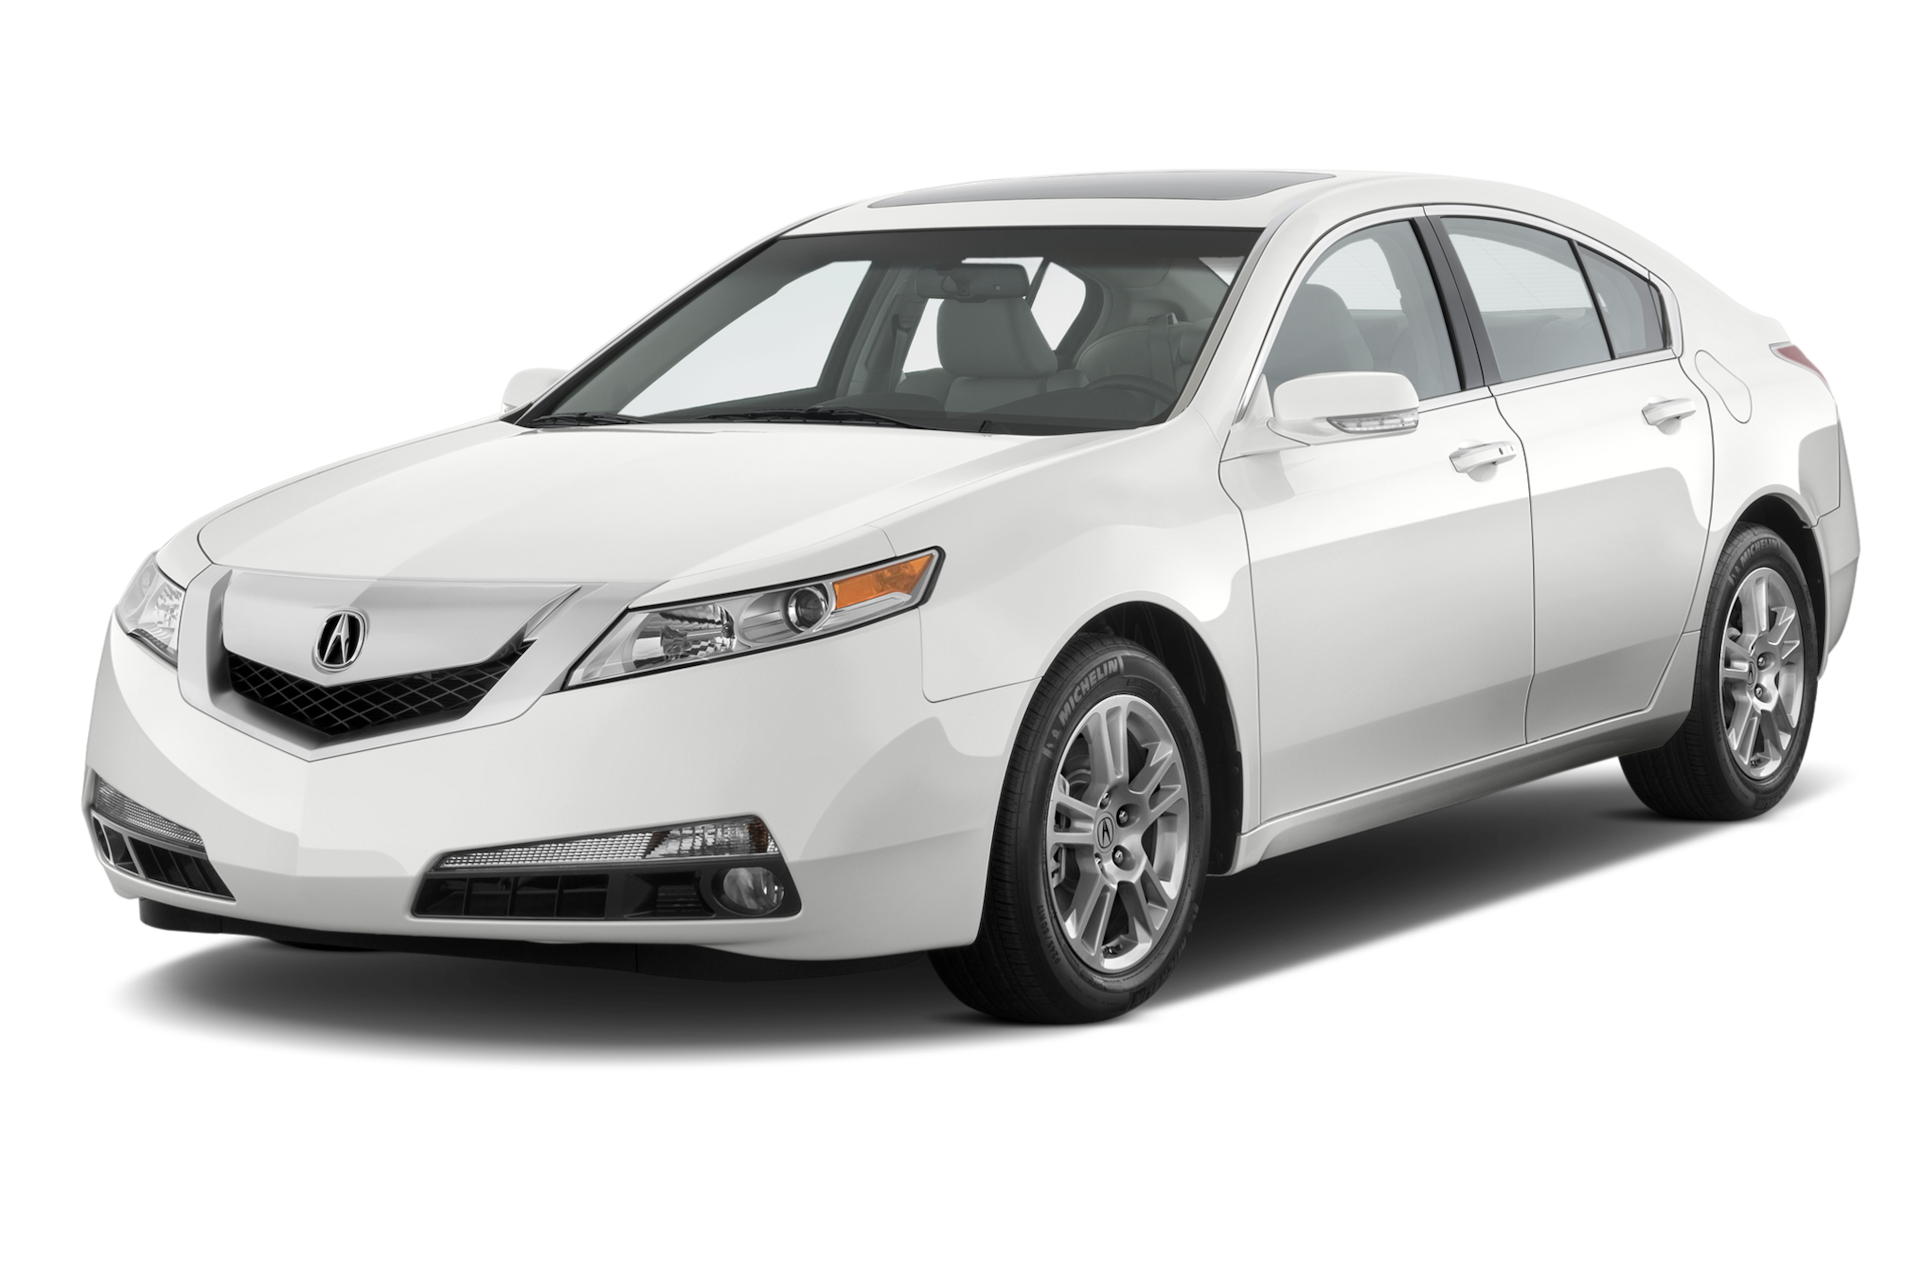 2011 Acura TL Prices, Reviews, and Photos - MotorTrend